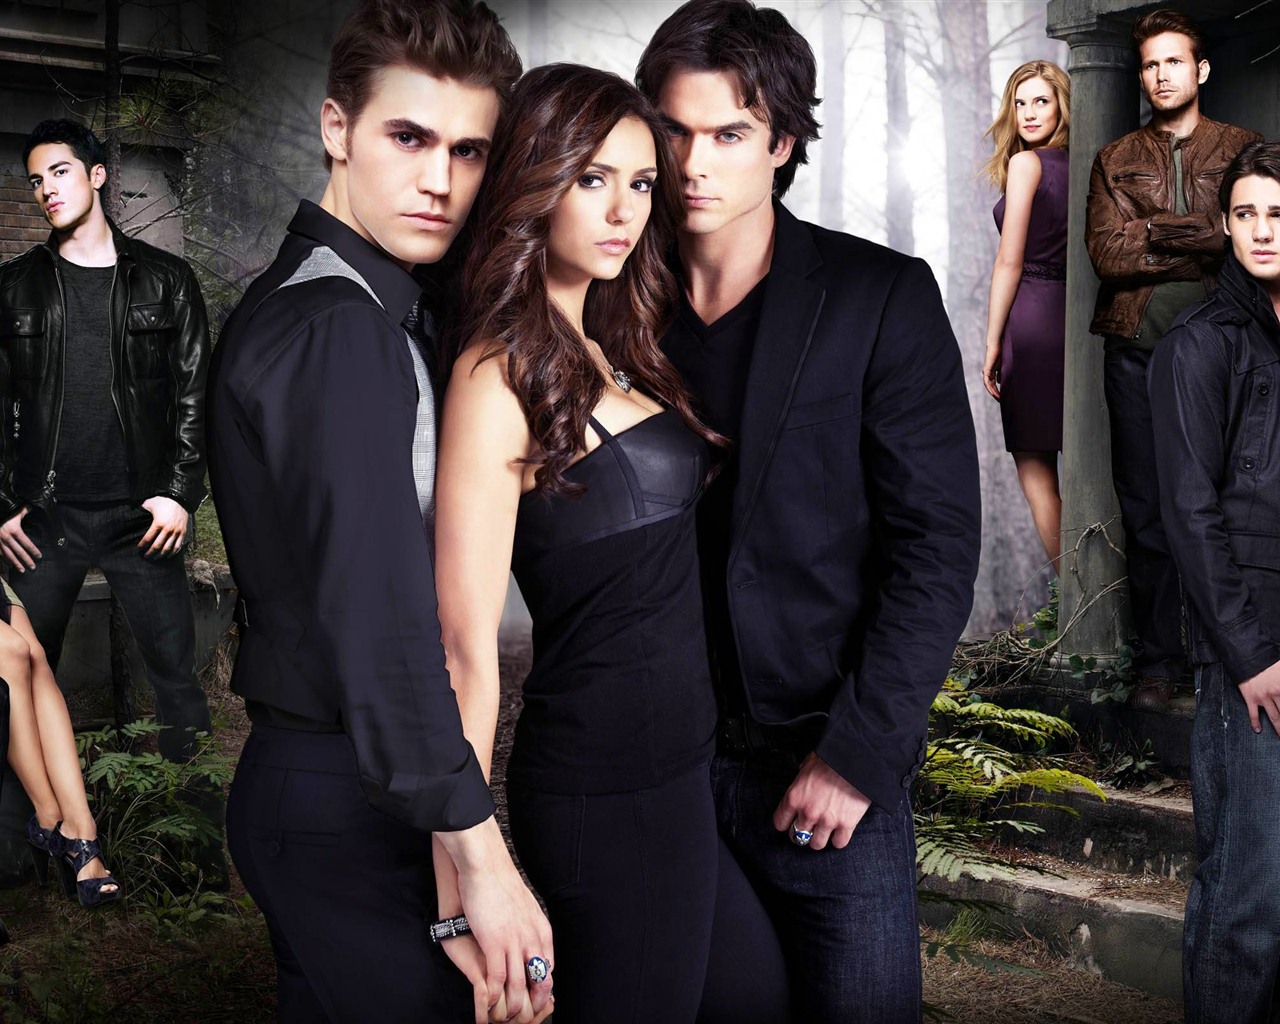 The Vampire Diaries HD Wallpapers #12 - 1280x1024